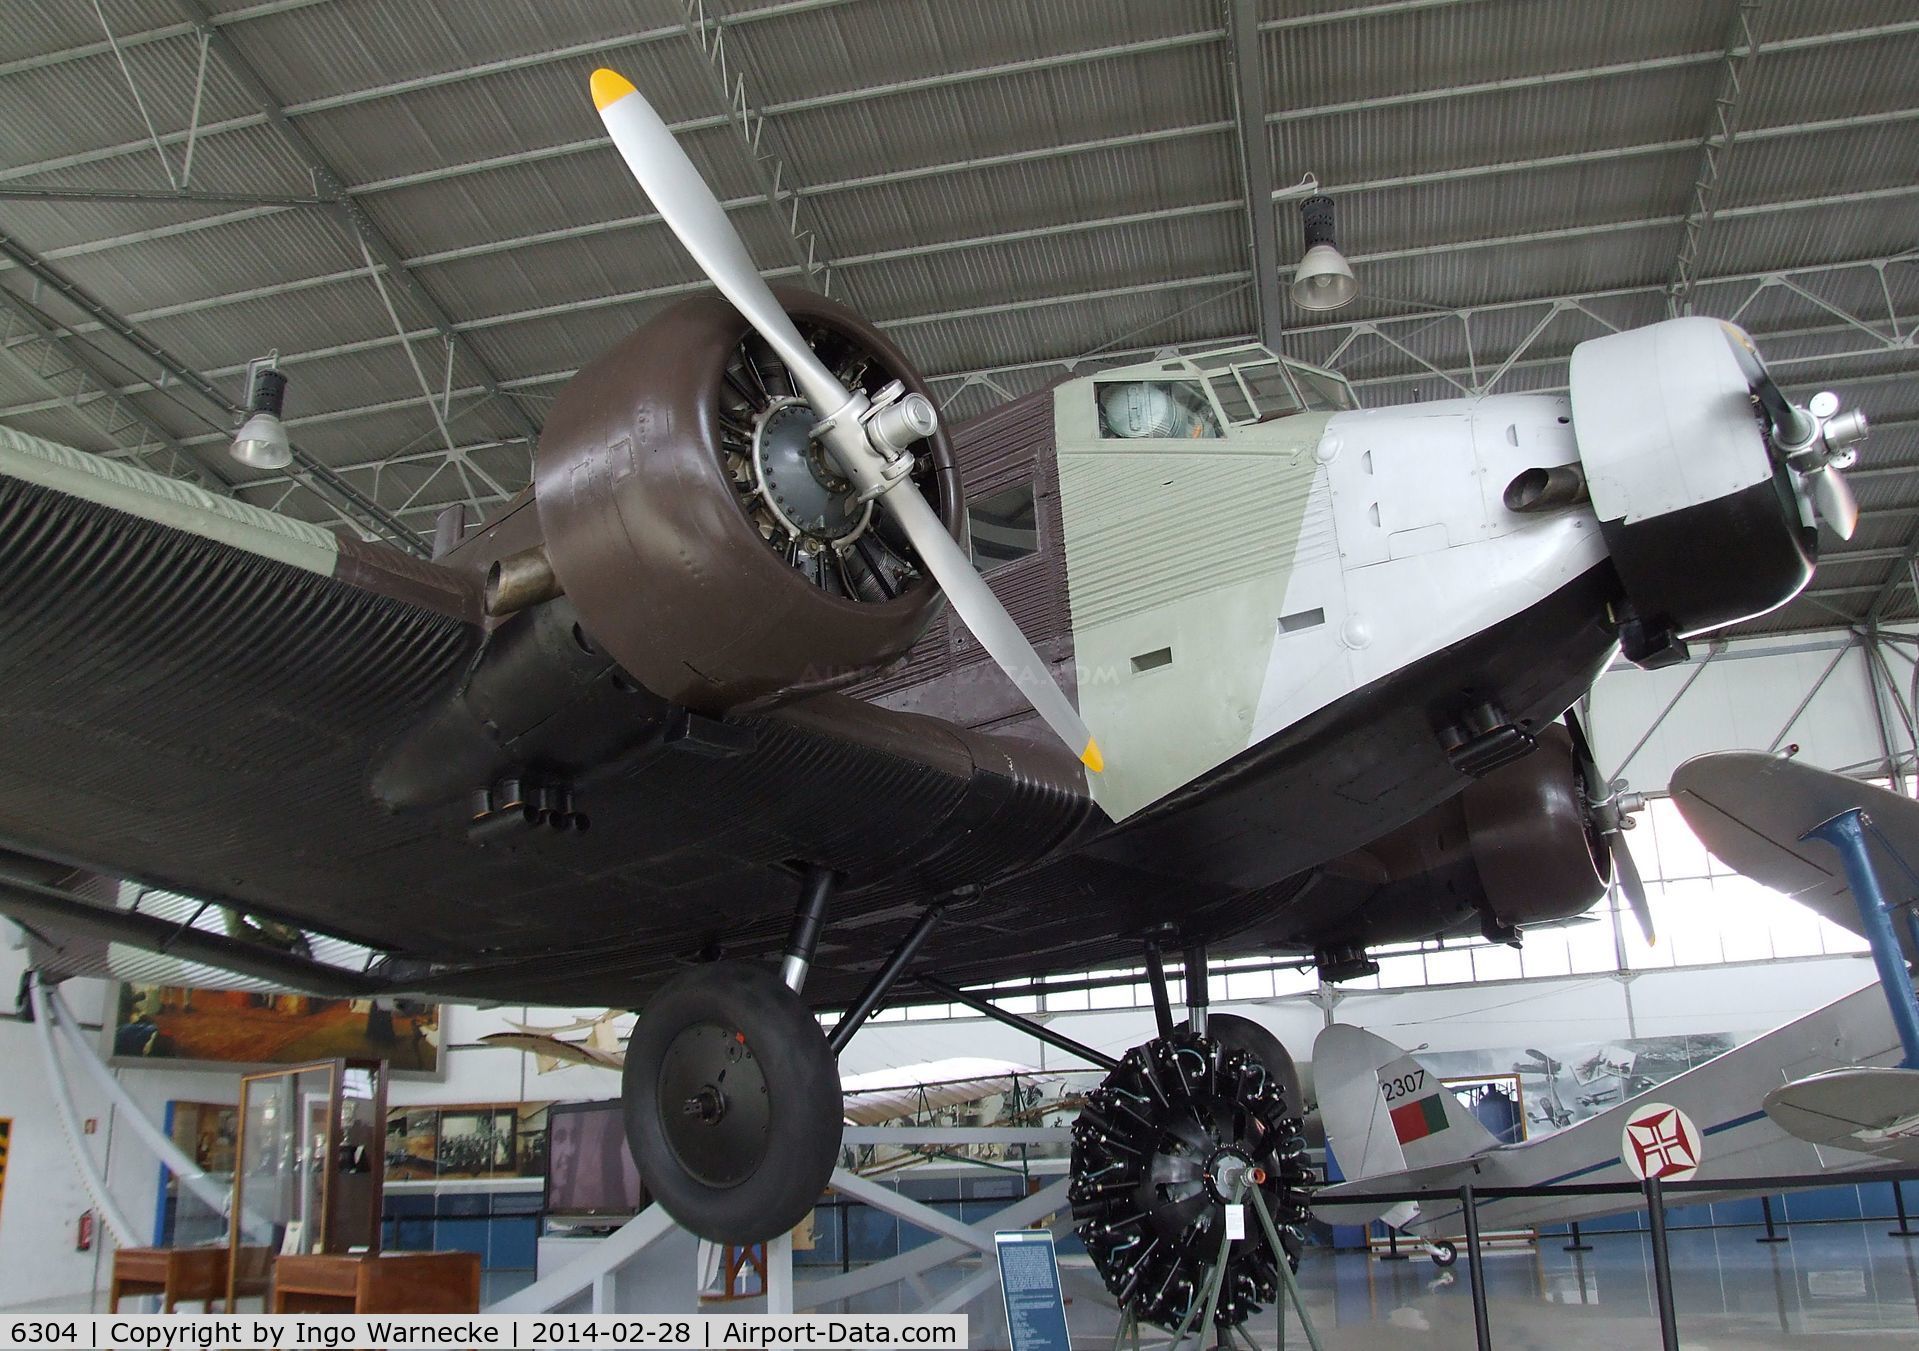 6304, Junkers Ju-52/3mg3e C/N 5661, Junkers Ju 52/3m g3e (converted to Pratt&Whitney engines) at the Museu do Ar, Sintra